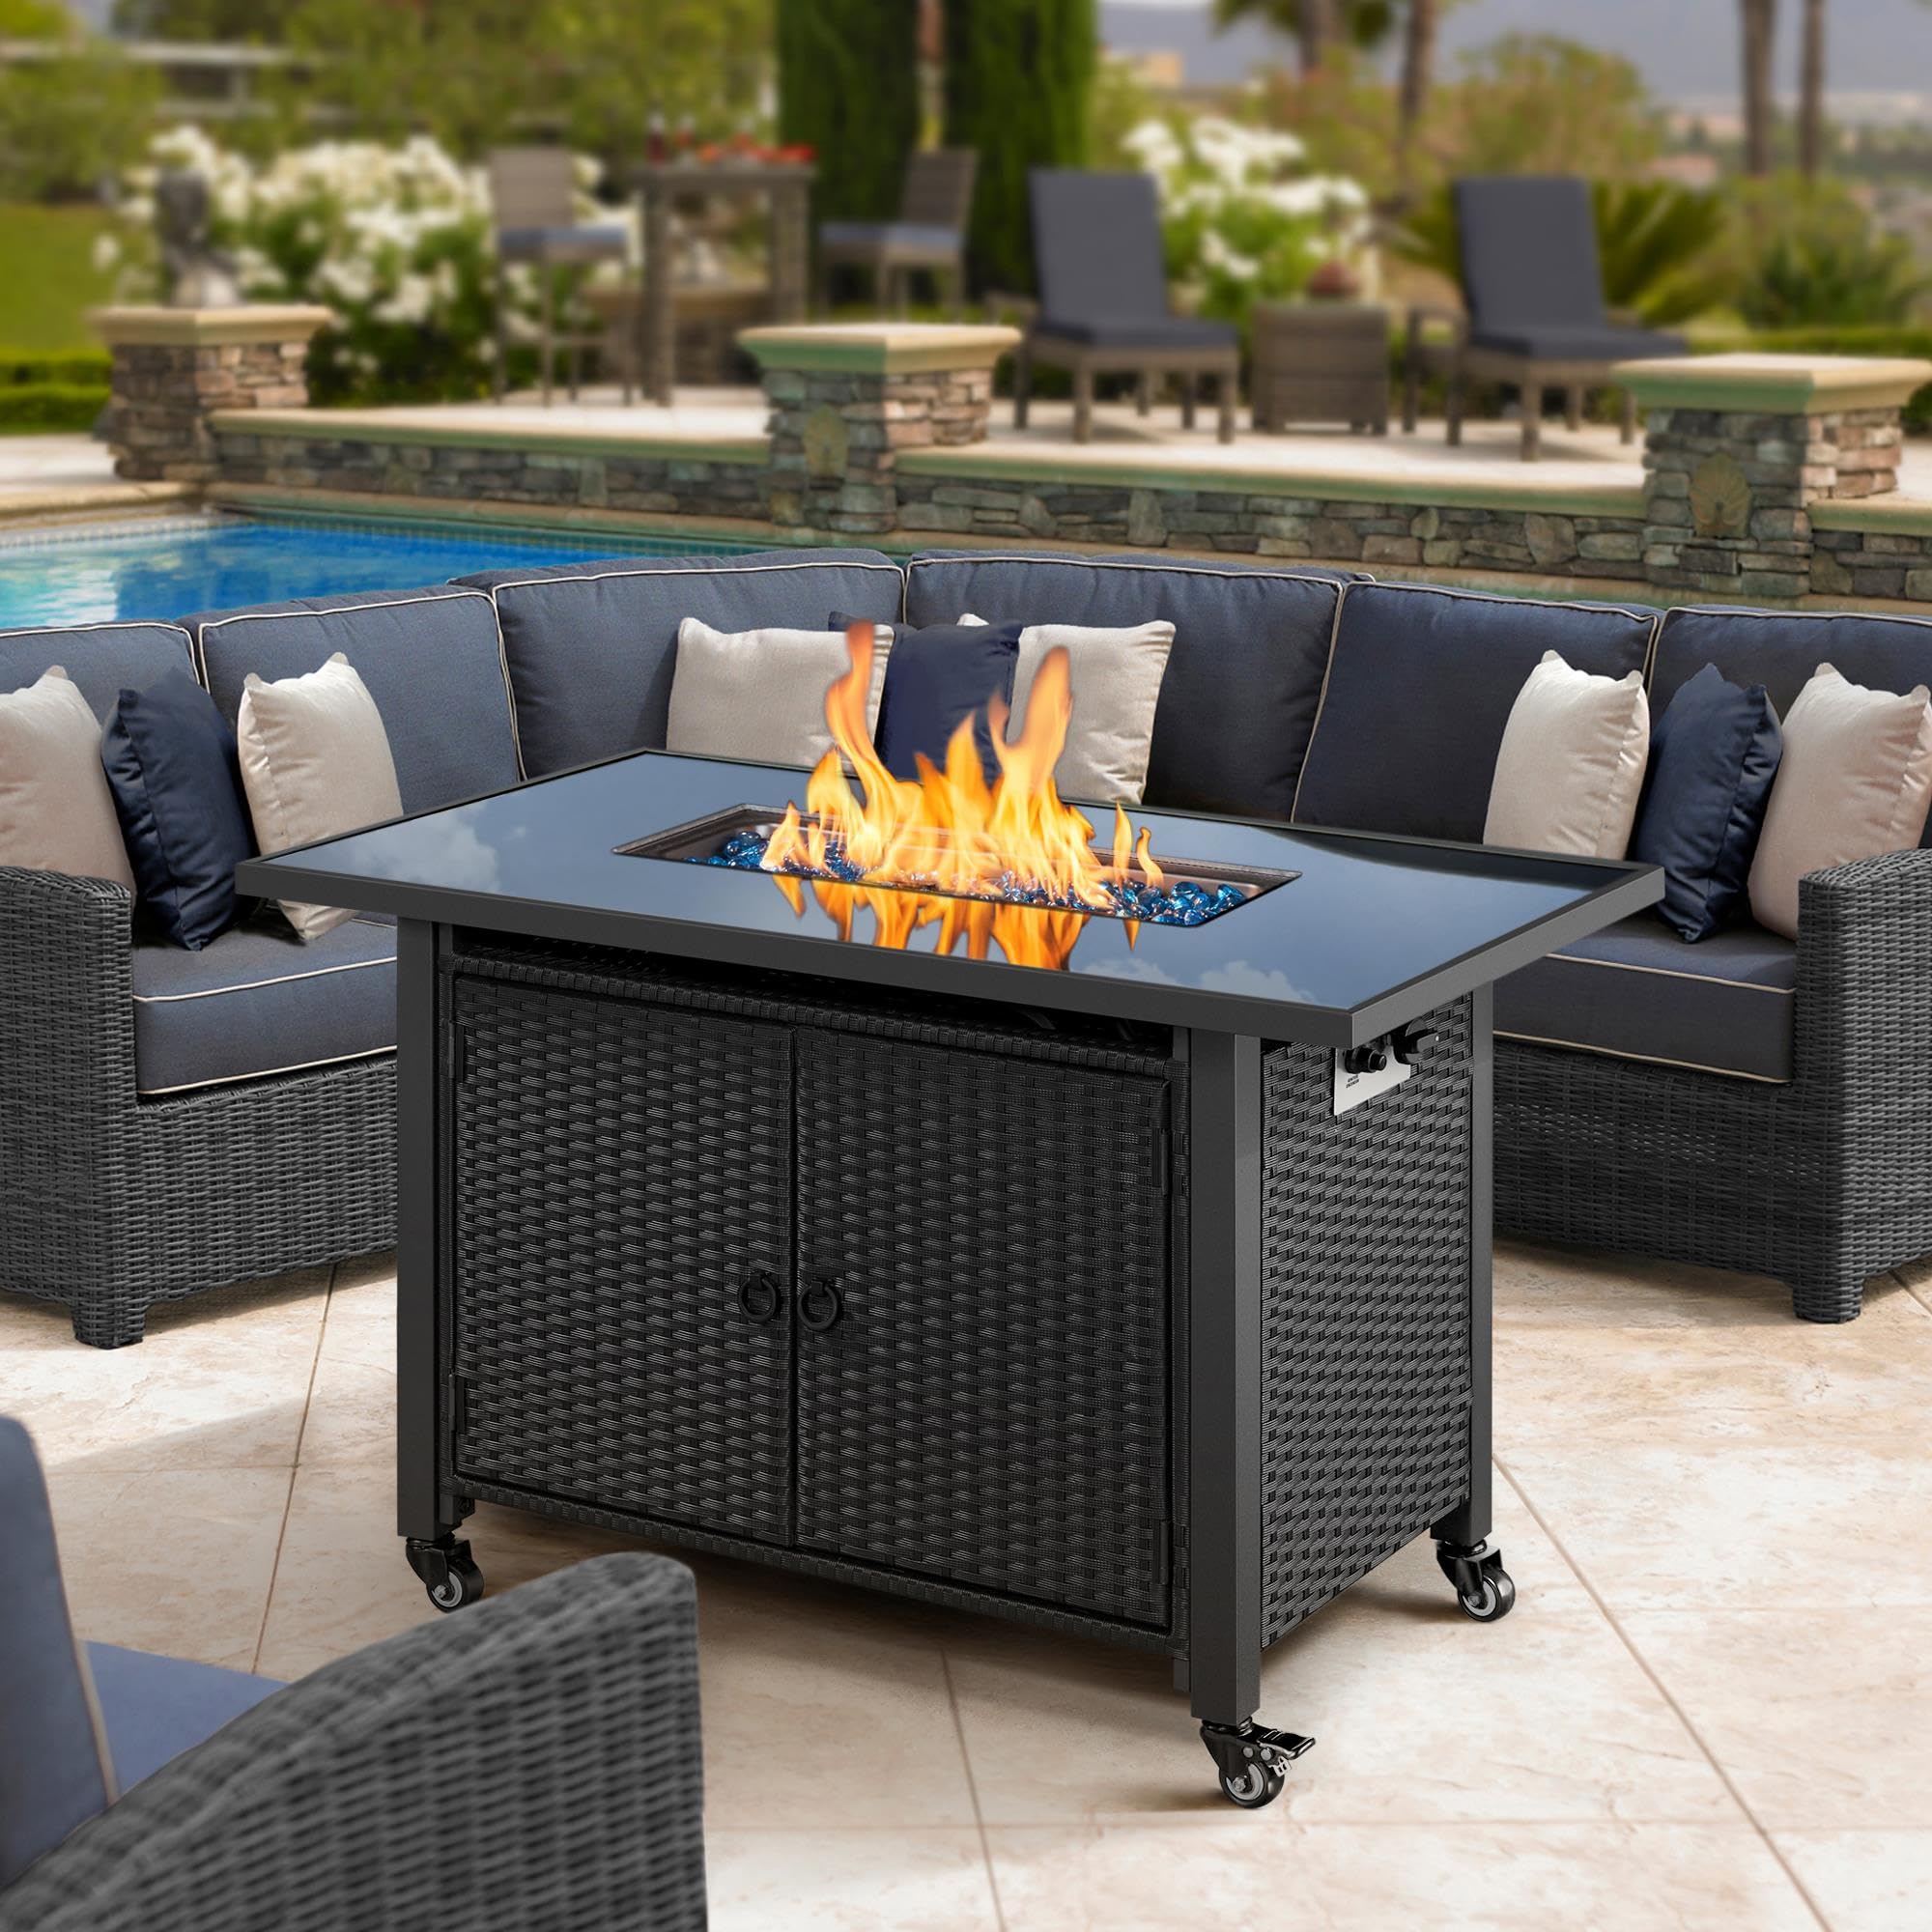 Yaheetech 43in Fire Pit Propane Fire Pit 50,000 BTU Gas Fire Pit Table with Two Storage Shelves, Glass Tabletop, Rattan Wicker Base and Waterproof Cover for Garden/Patio, CSA Certification